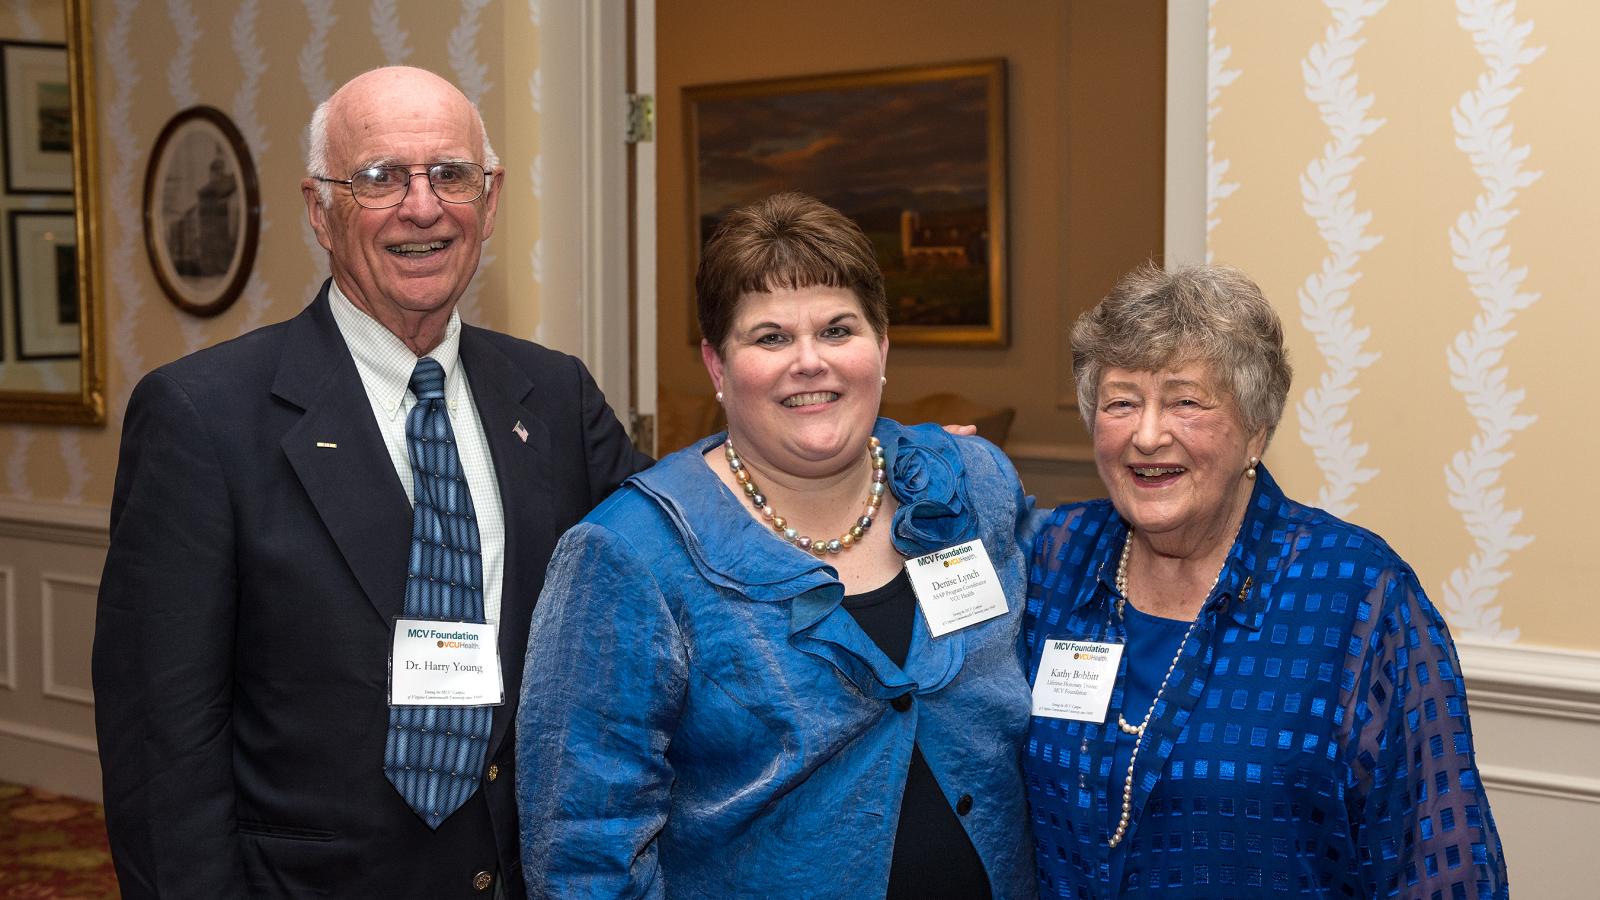 Harry Young, M.D., Denise Lynch, RN, and Kathy Bobbitt, Ed.D., gather for well-deserved recognition at our annual dinner and awards ceremony where we honor people who have made significant contributions to the world-class patient care, research and education that VCU Health delivers on the MCV Campus and beyond.